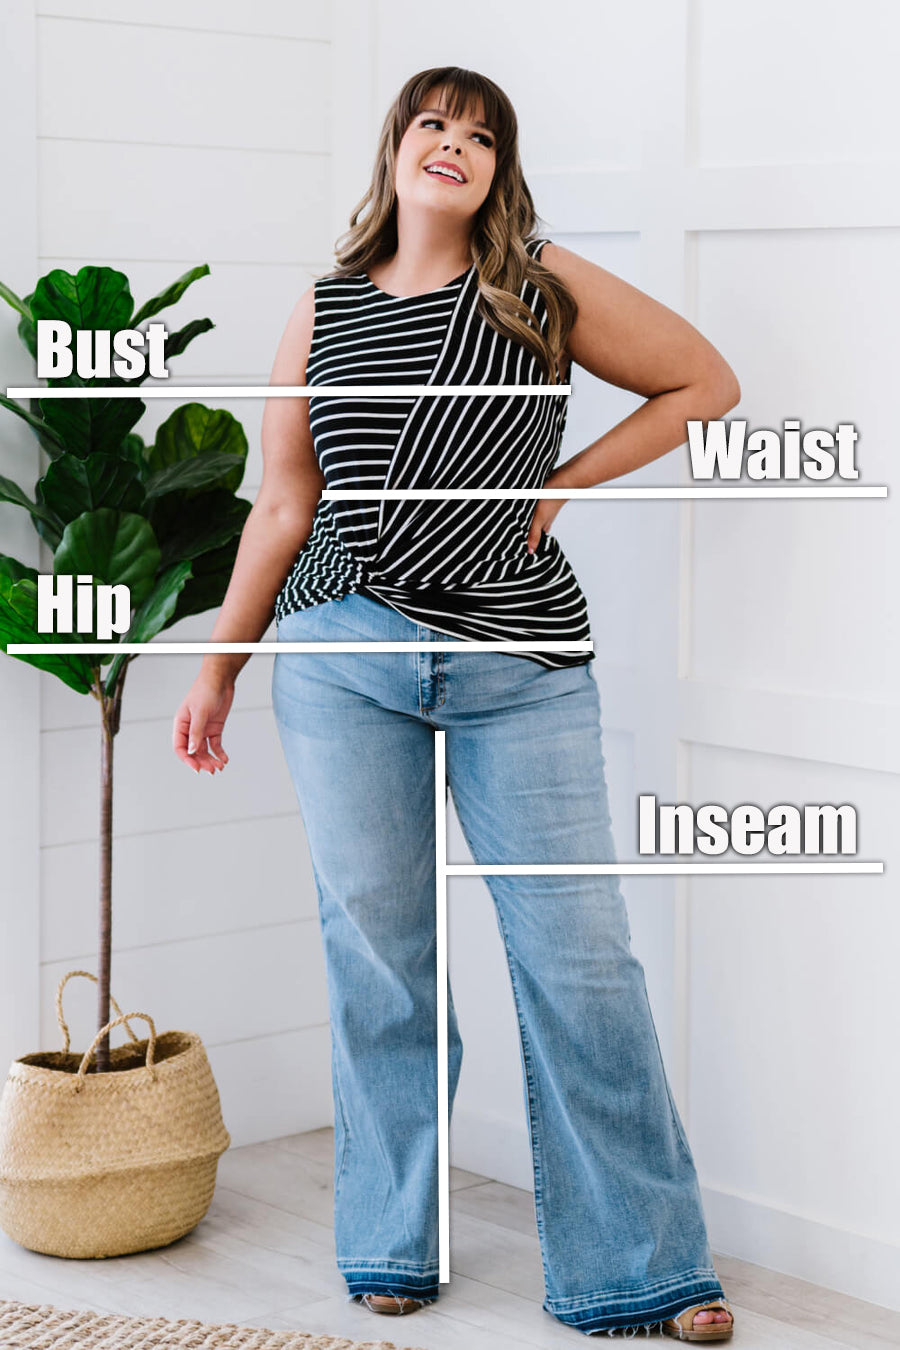 How to Measure Your Body for Women's Jackets